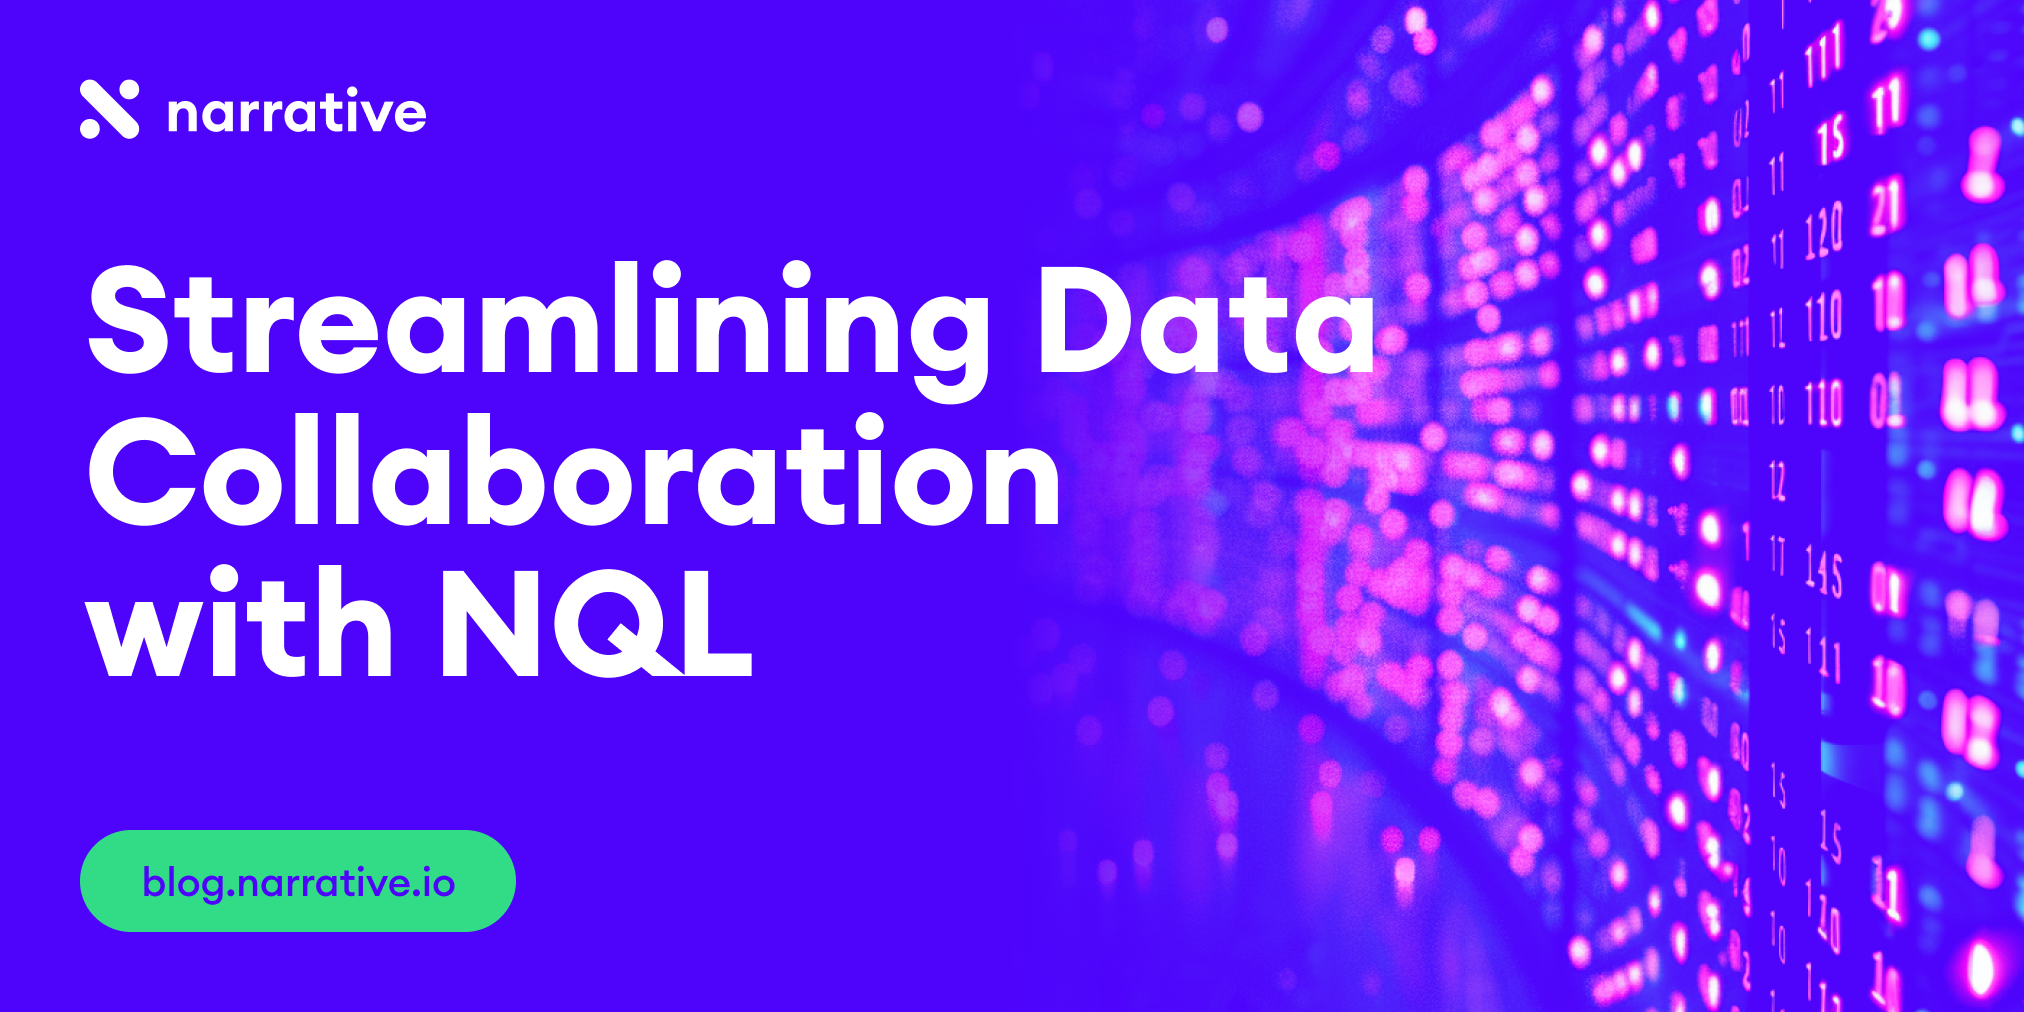 Streamlining Data Collaboration with NQL: Commingling Standardized and Raw Data